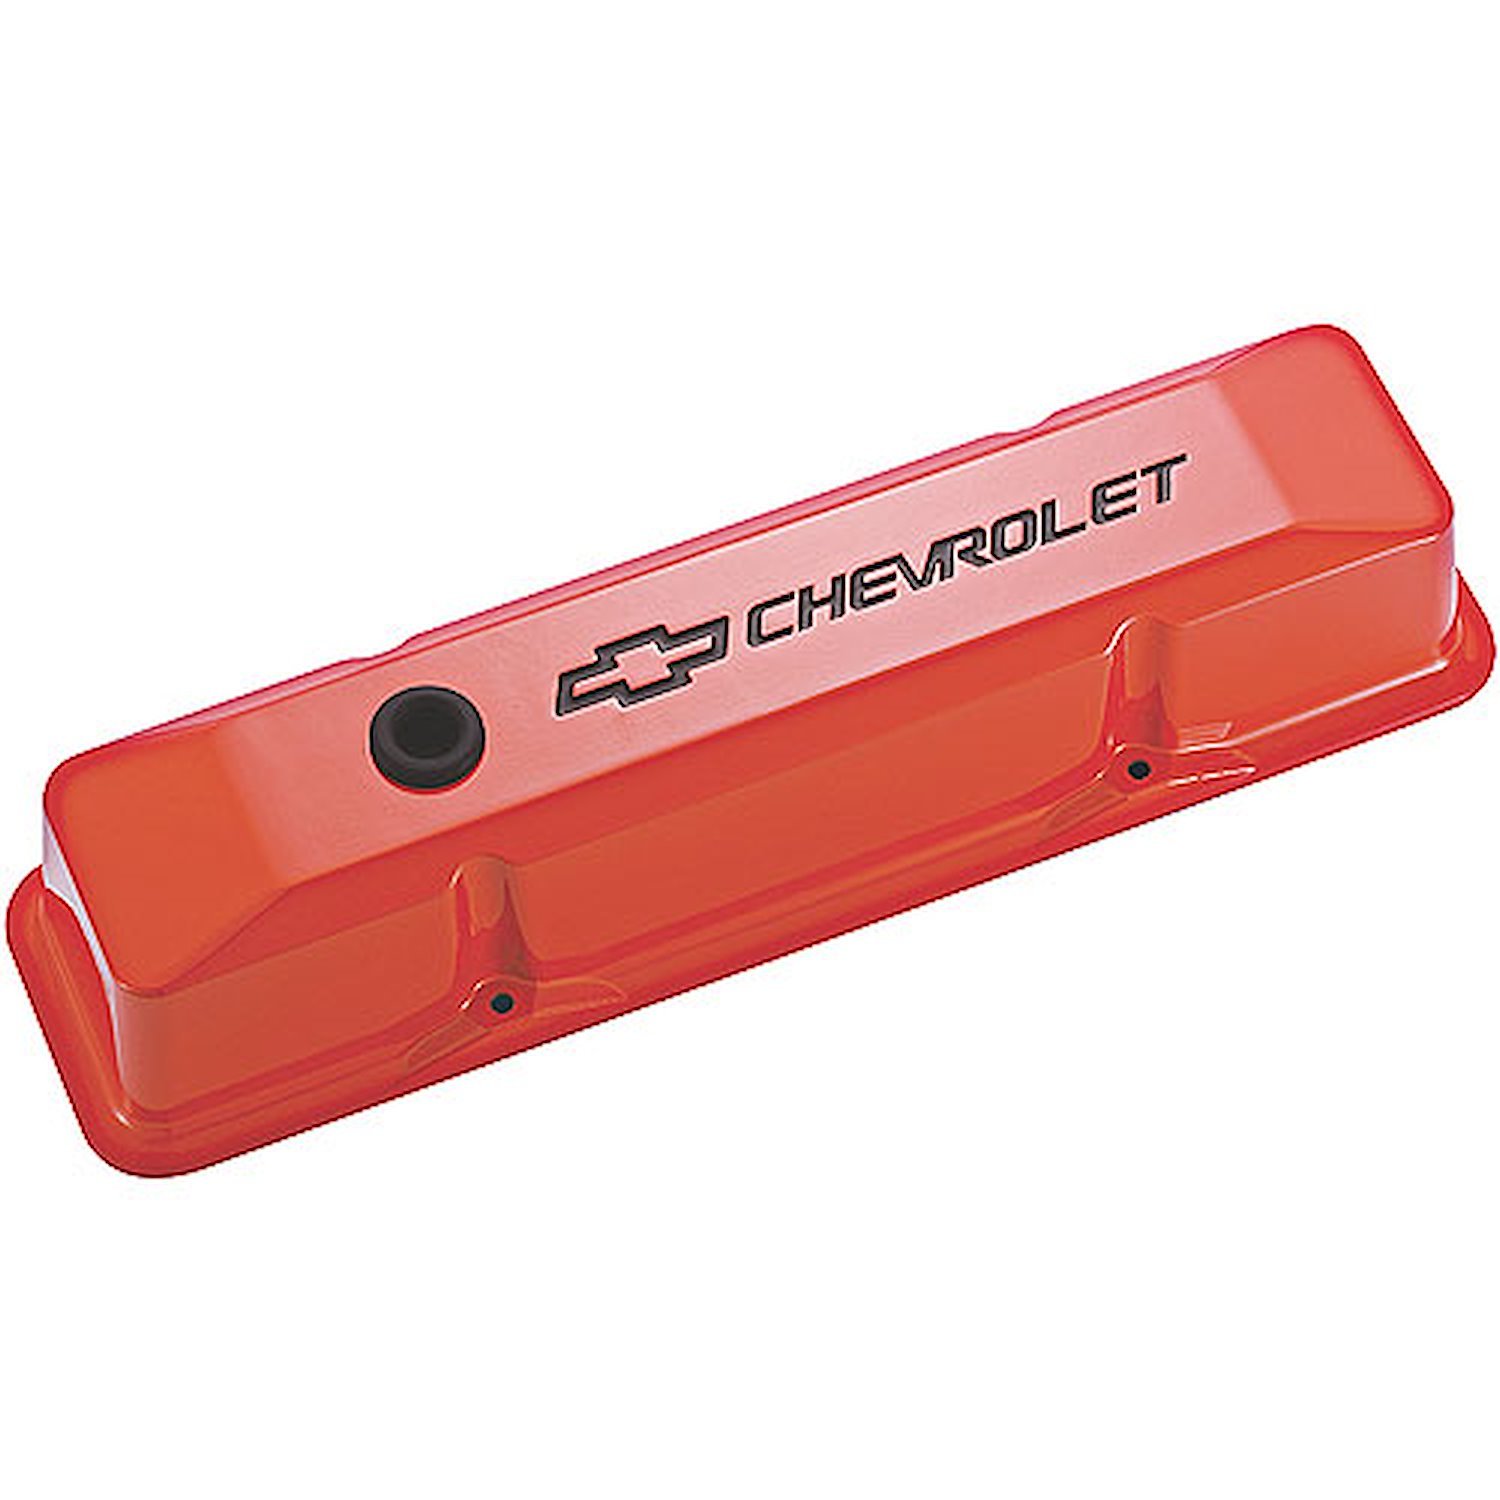 Die-Cast Aluminum Tall Valve Covers for 1958-1986 Small Block Chevy with Chevrolet/Bowtie Recessed Emblem in Chevy Orange Finish